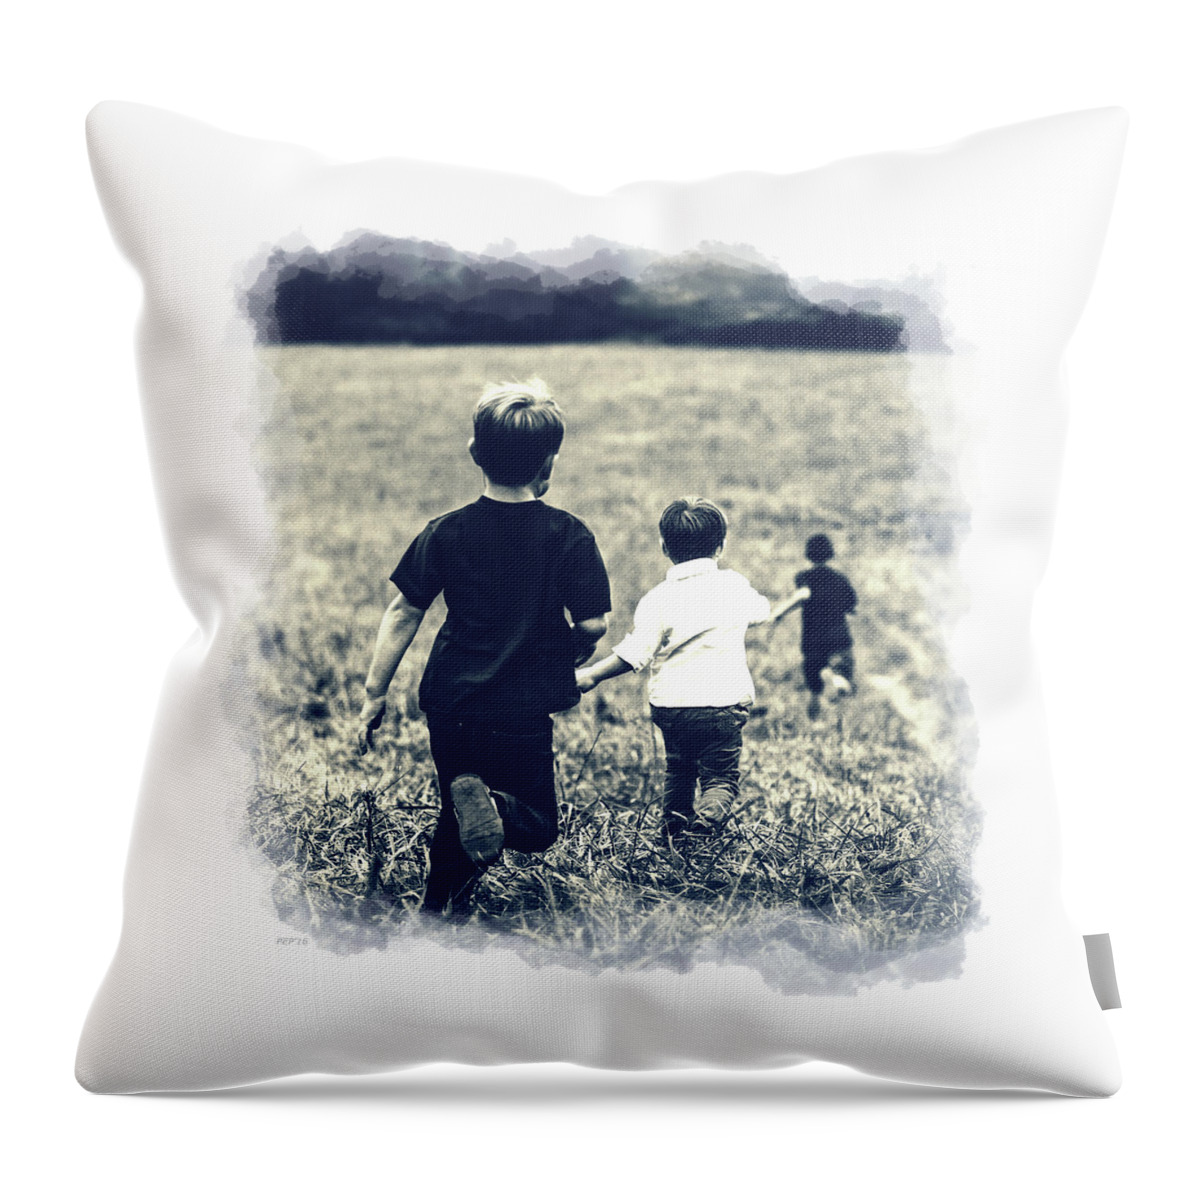 Sepia Tone Throw Pillow featuring the photograph Catch Me If You Can by Phil Perkins